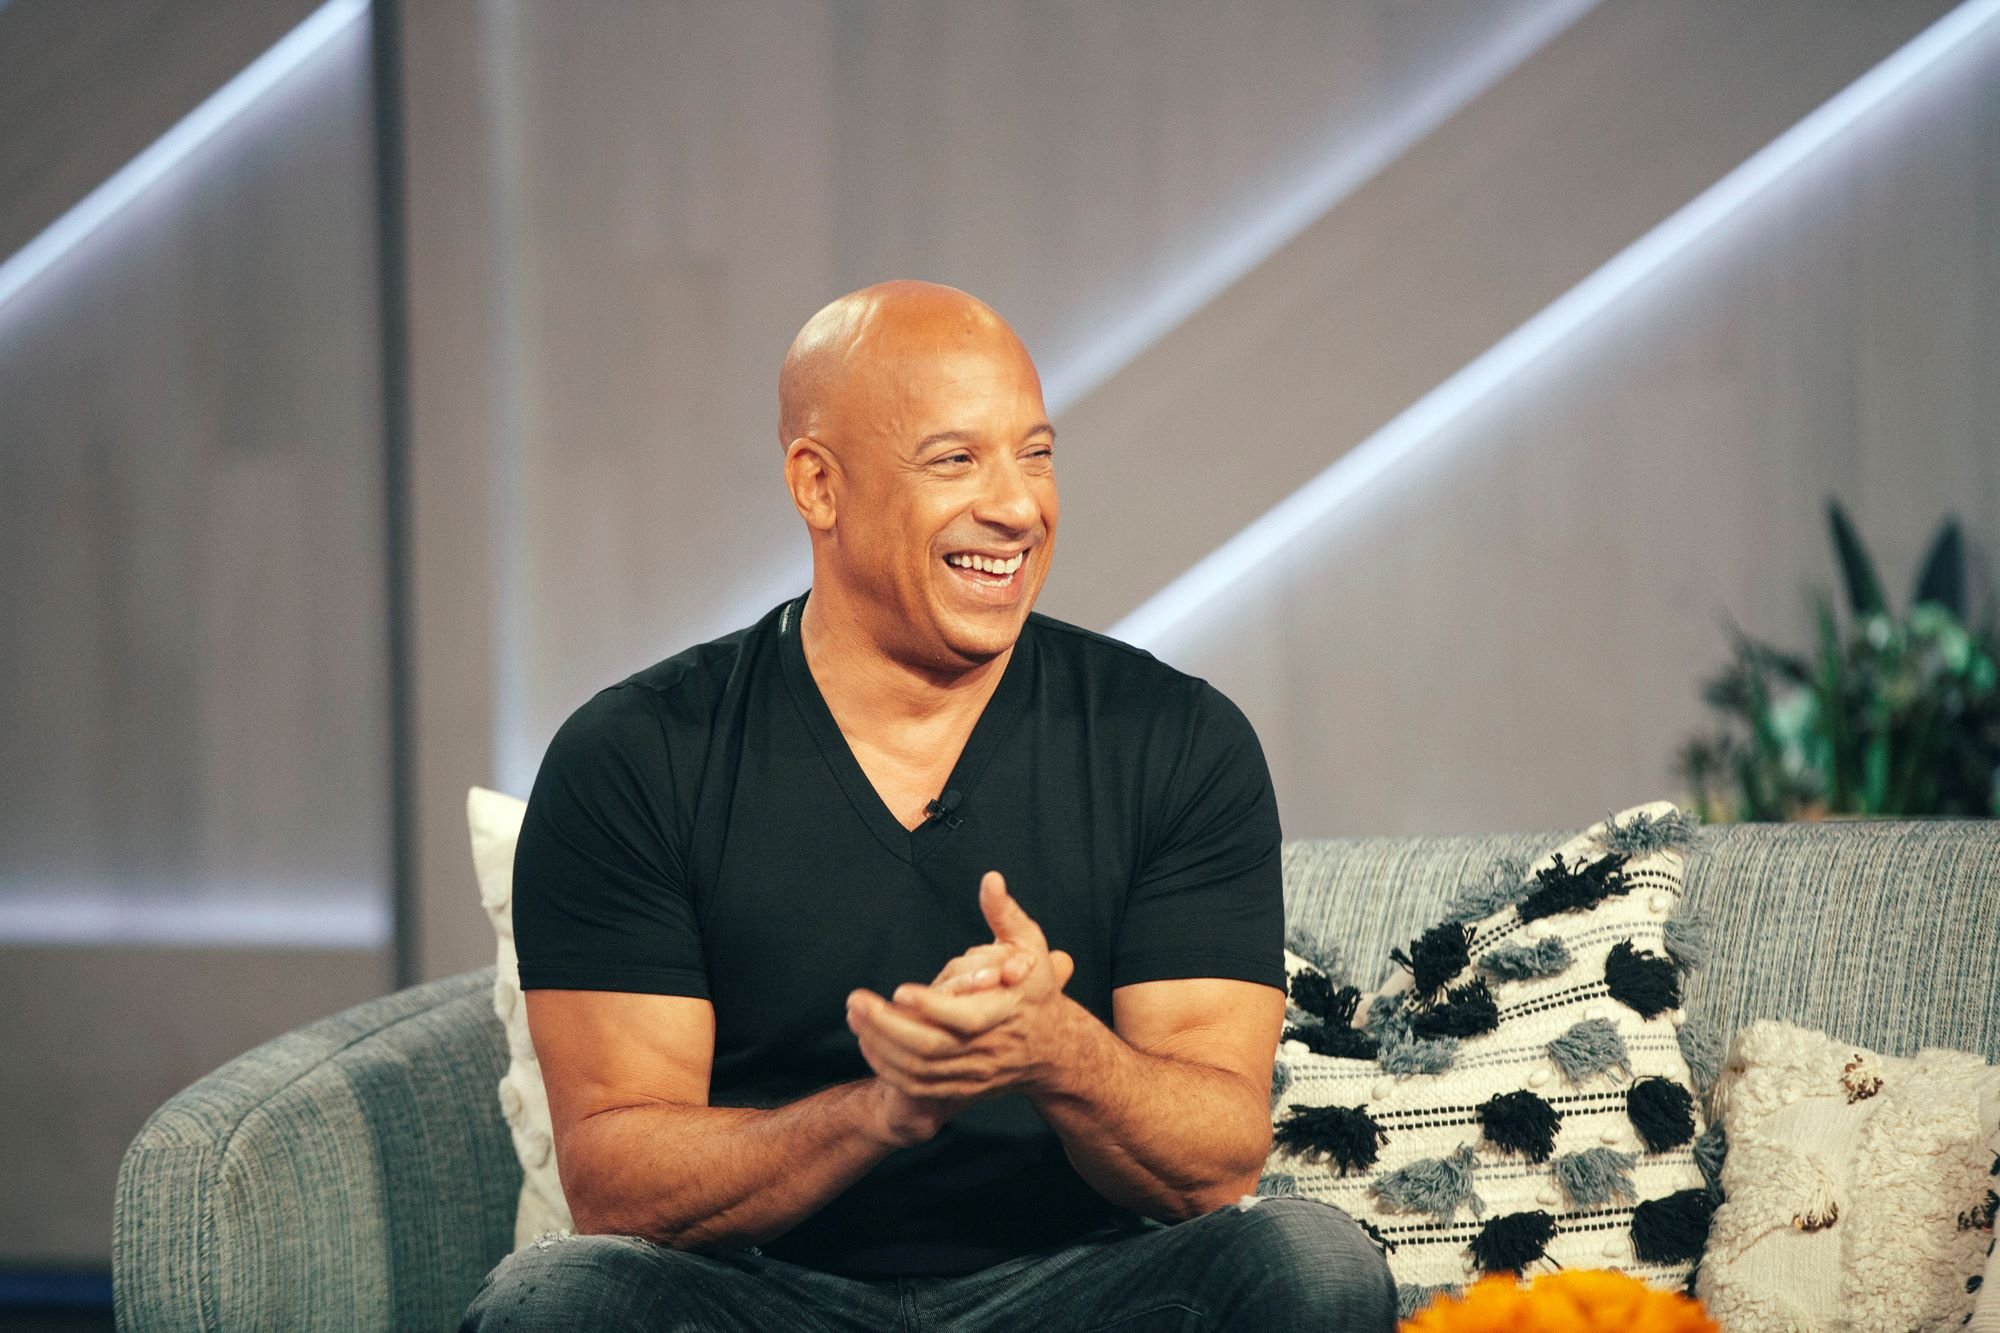 Vin Diesel Got His Acting Start When He Was Caught Breaking Into a Theater  at 7-Years-Old